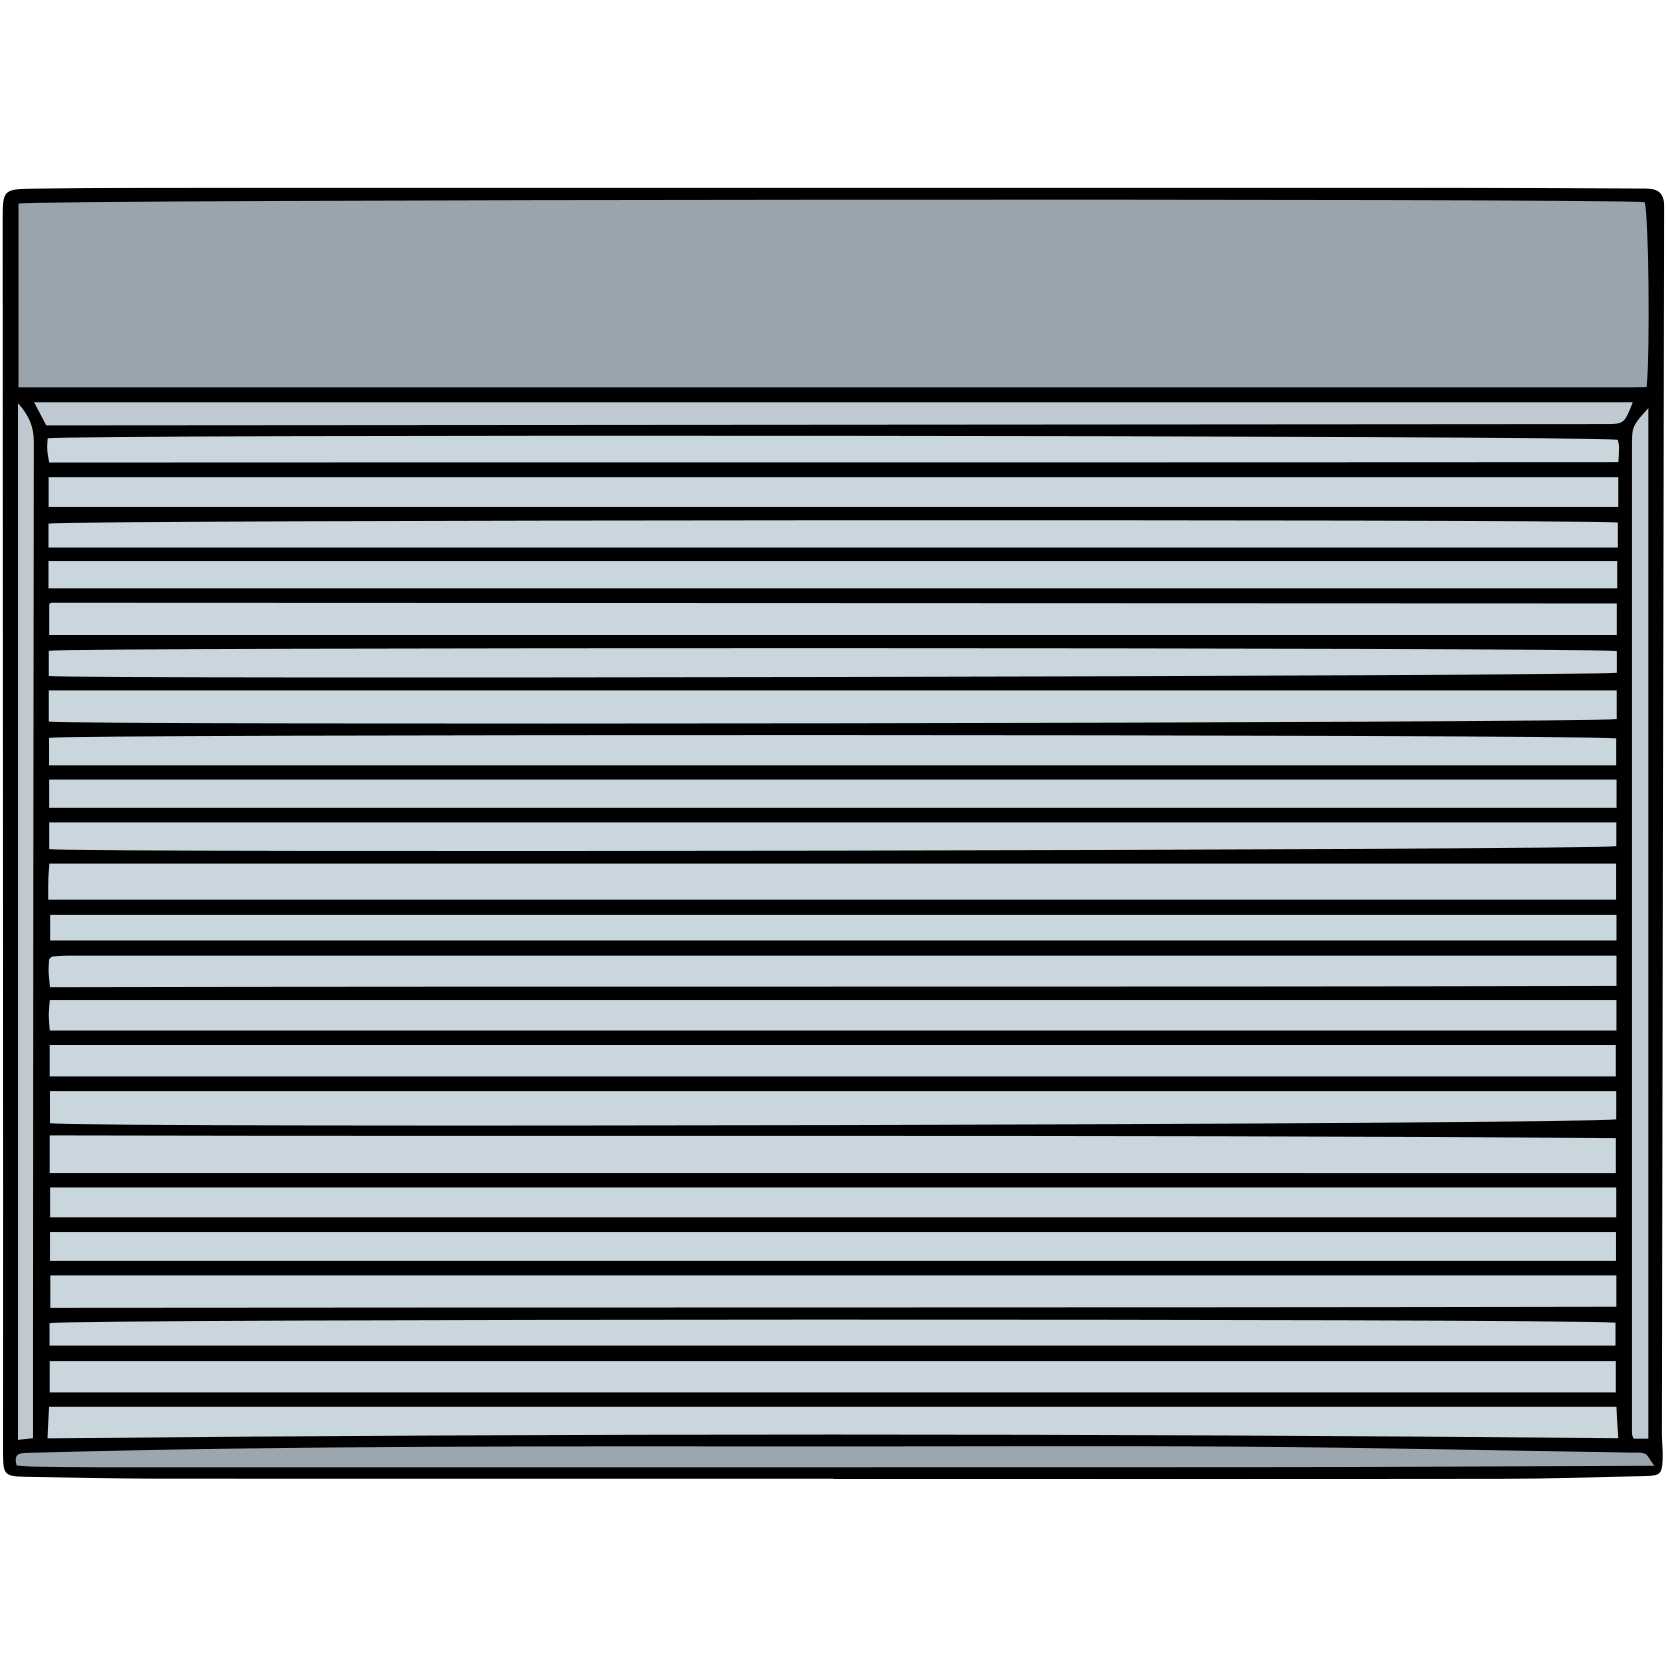 English vocabulary with pictures - Parts of a house - Shutter